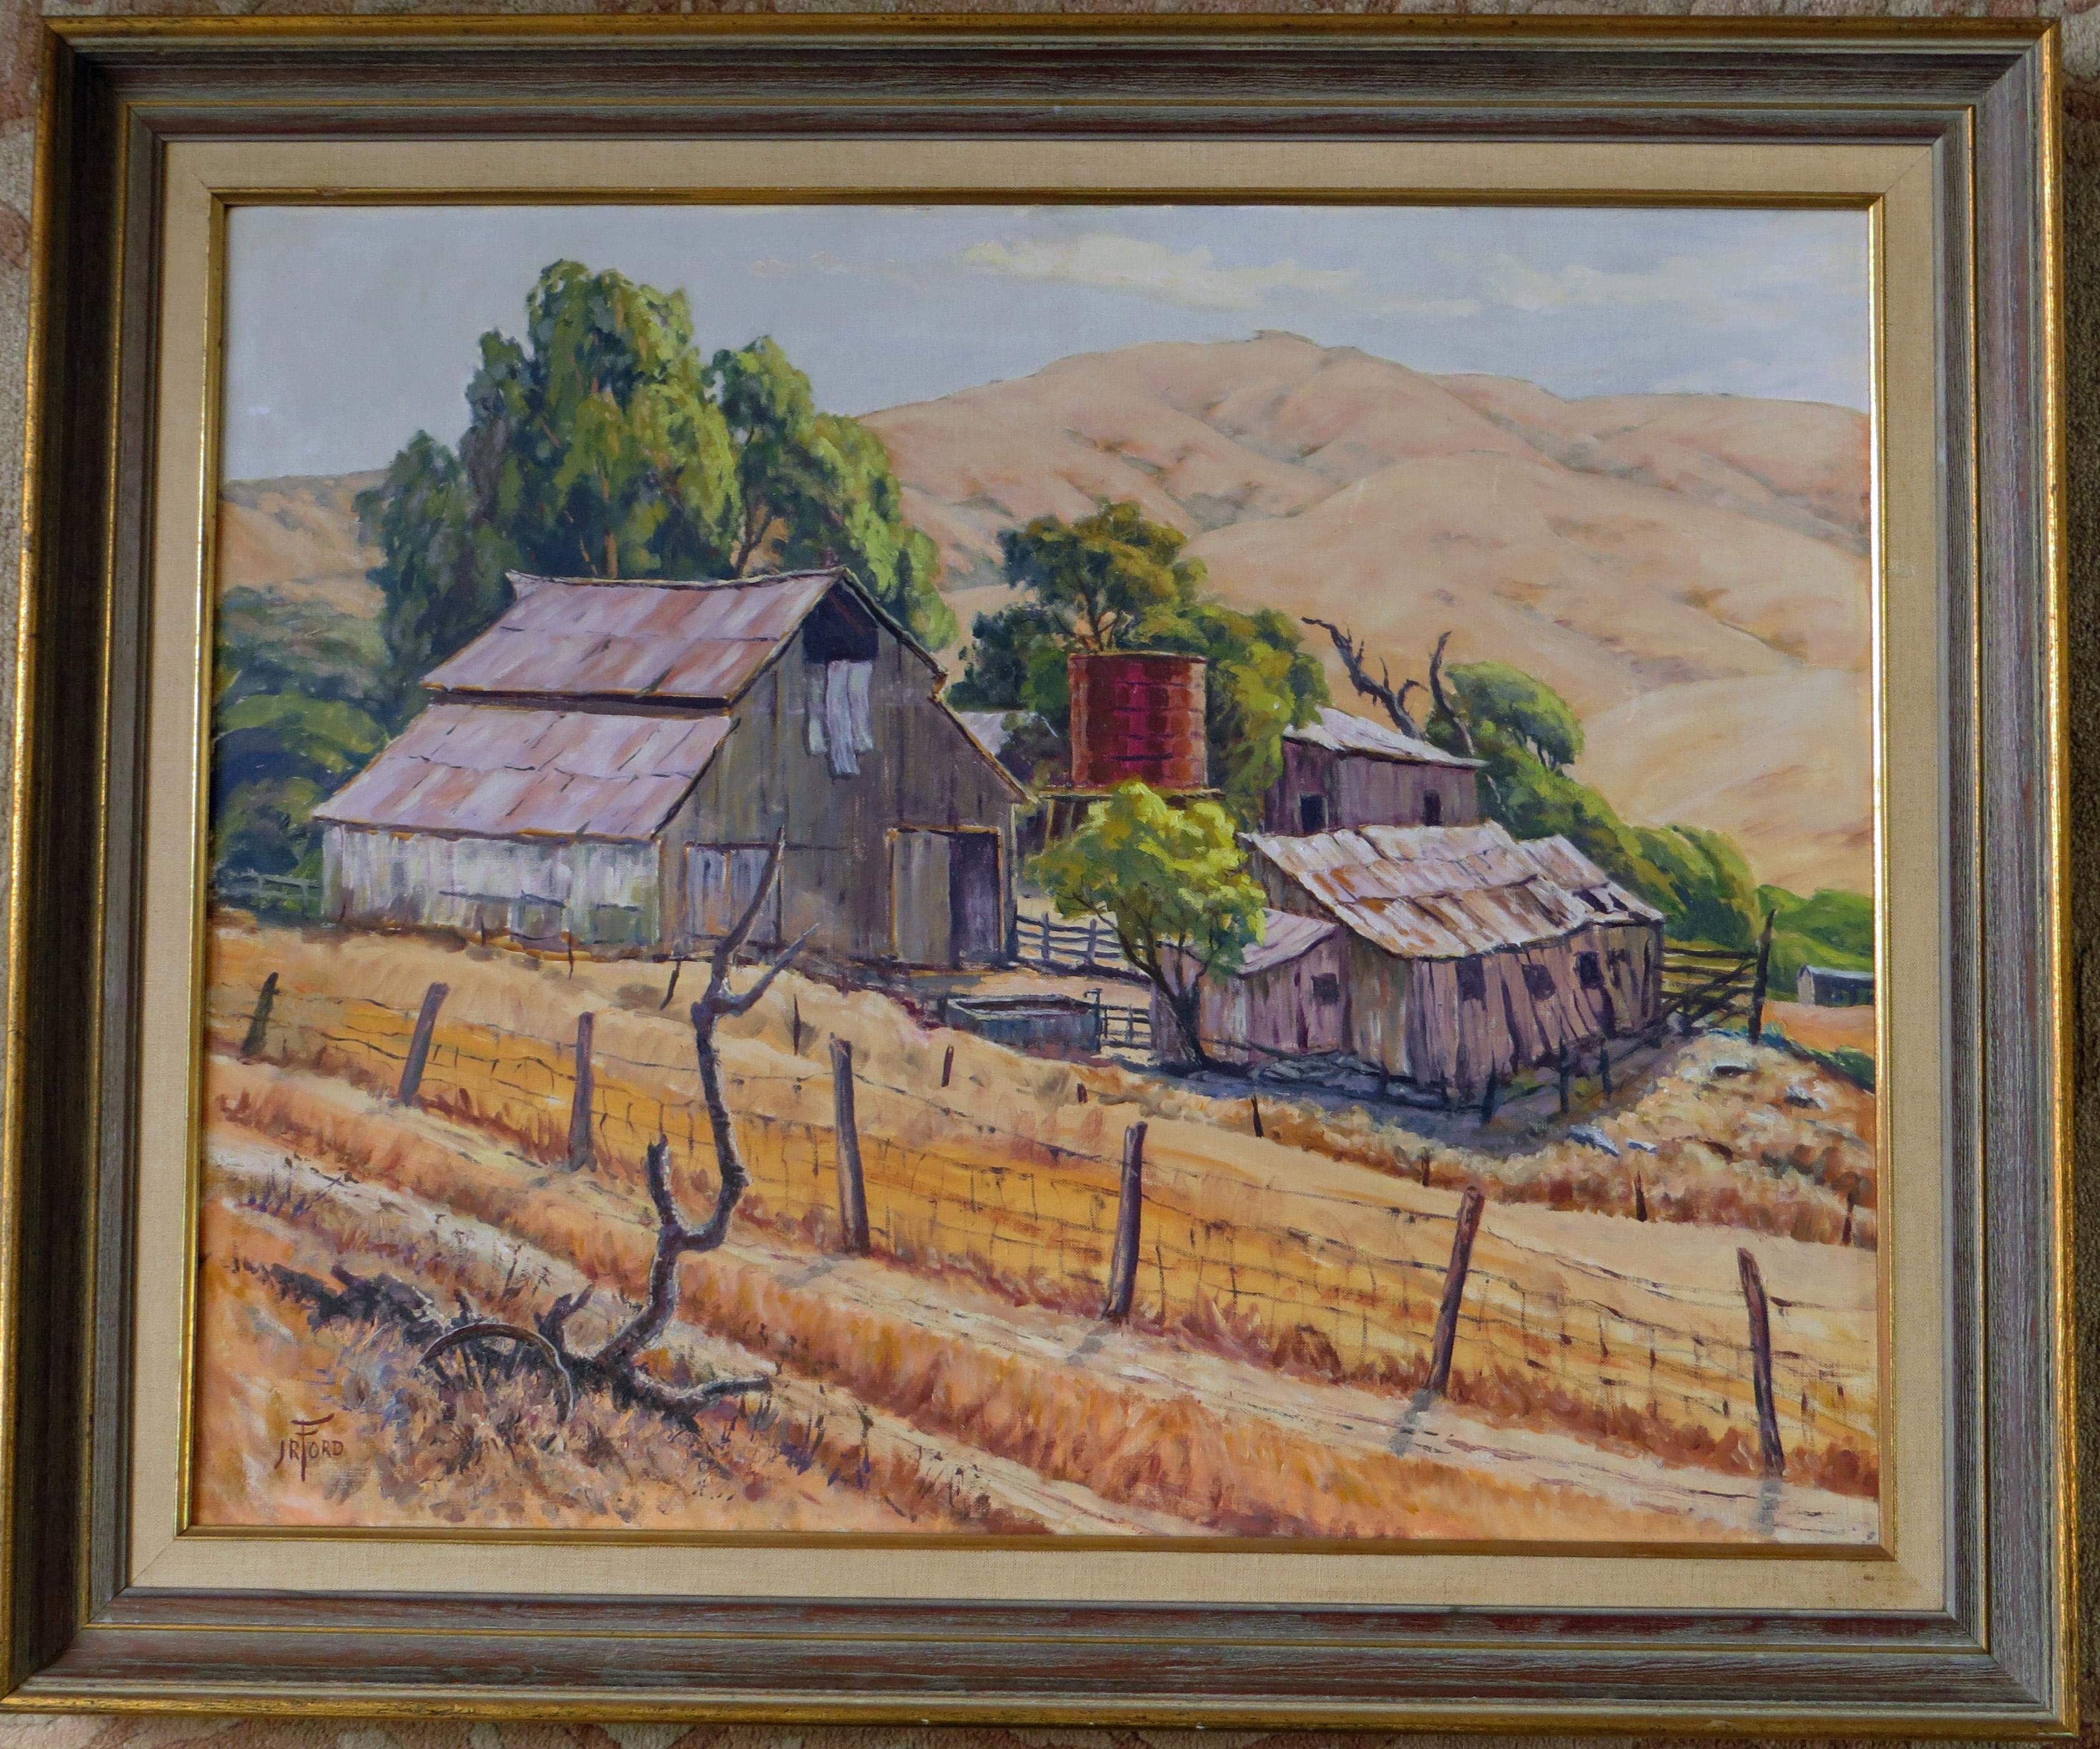  Rancho El Camino im Sommer – Painting von James Russell Ford